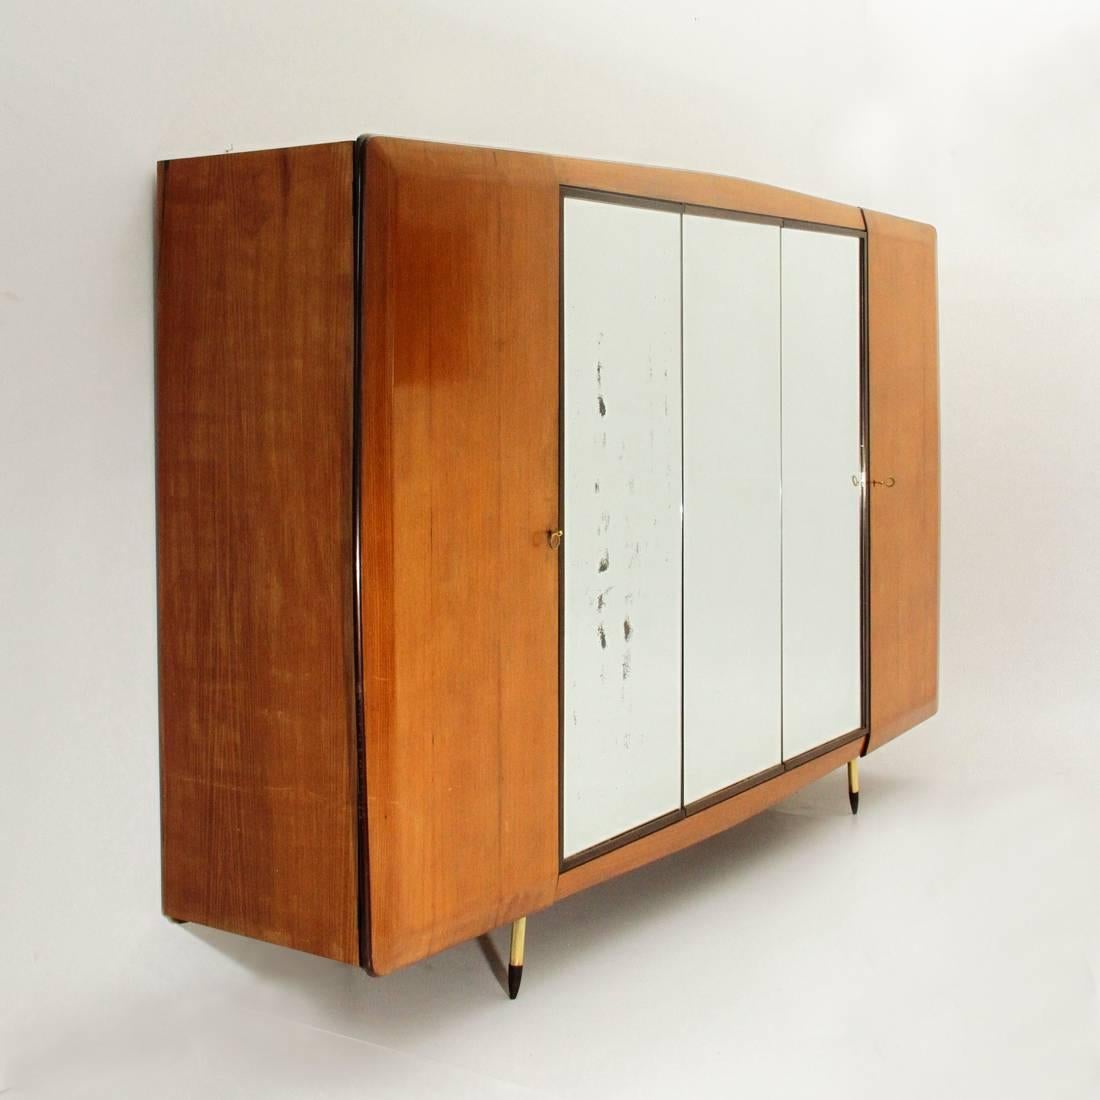 Beautiful Italian closet produced by Fratelli Giussani in the 1950s.
Veneered rosewood frame.
Four-door opening with lock, two in mirror.
Interior chest of drawers, brass hangers.
Brass legs with wooden tips.
Good general conditions, some signs